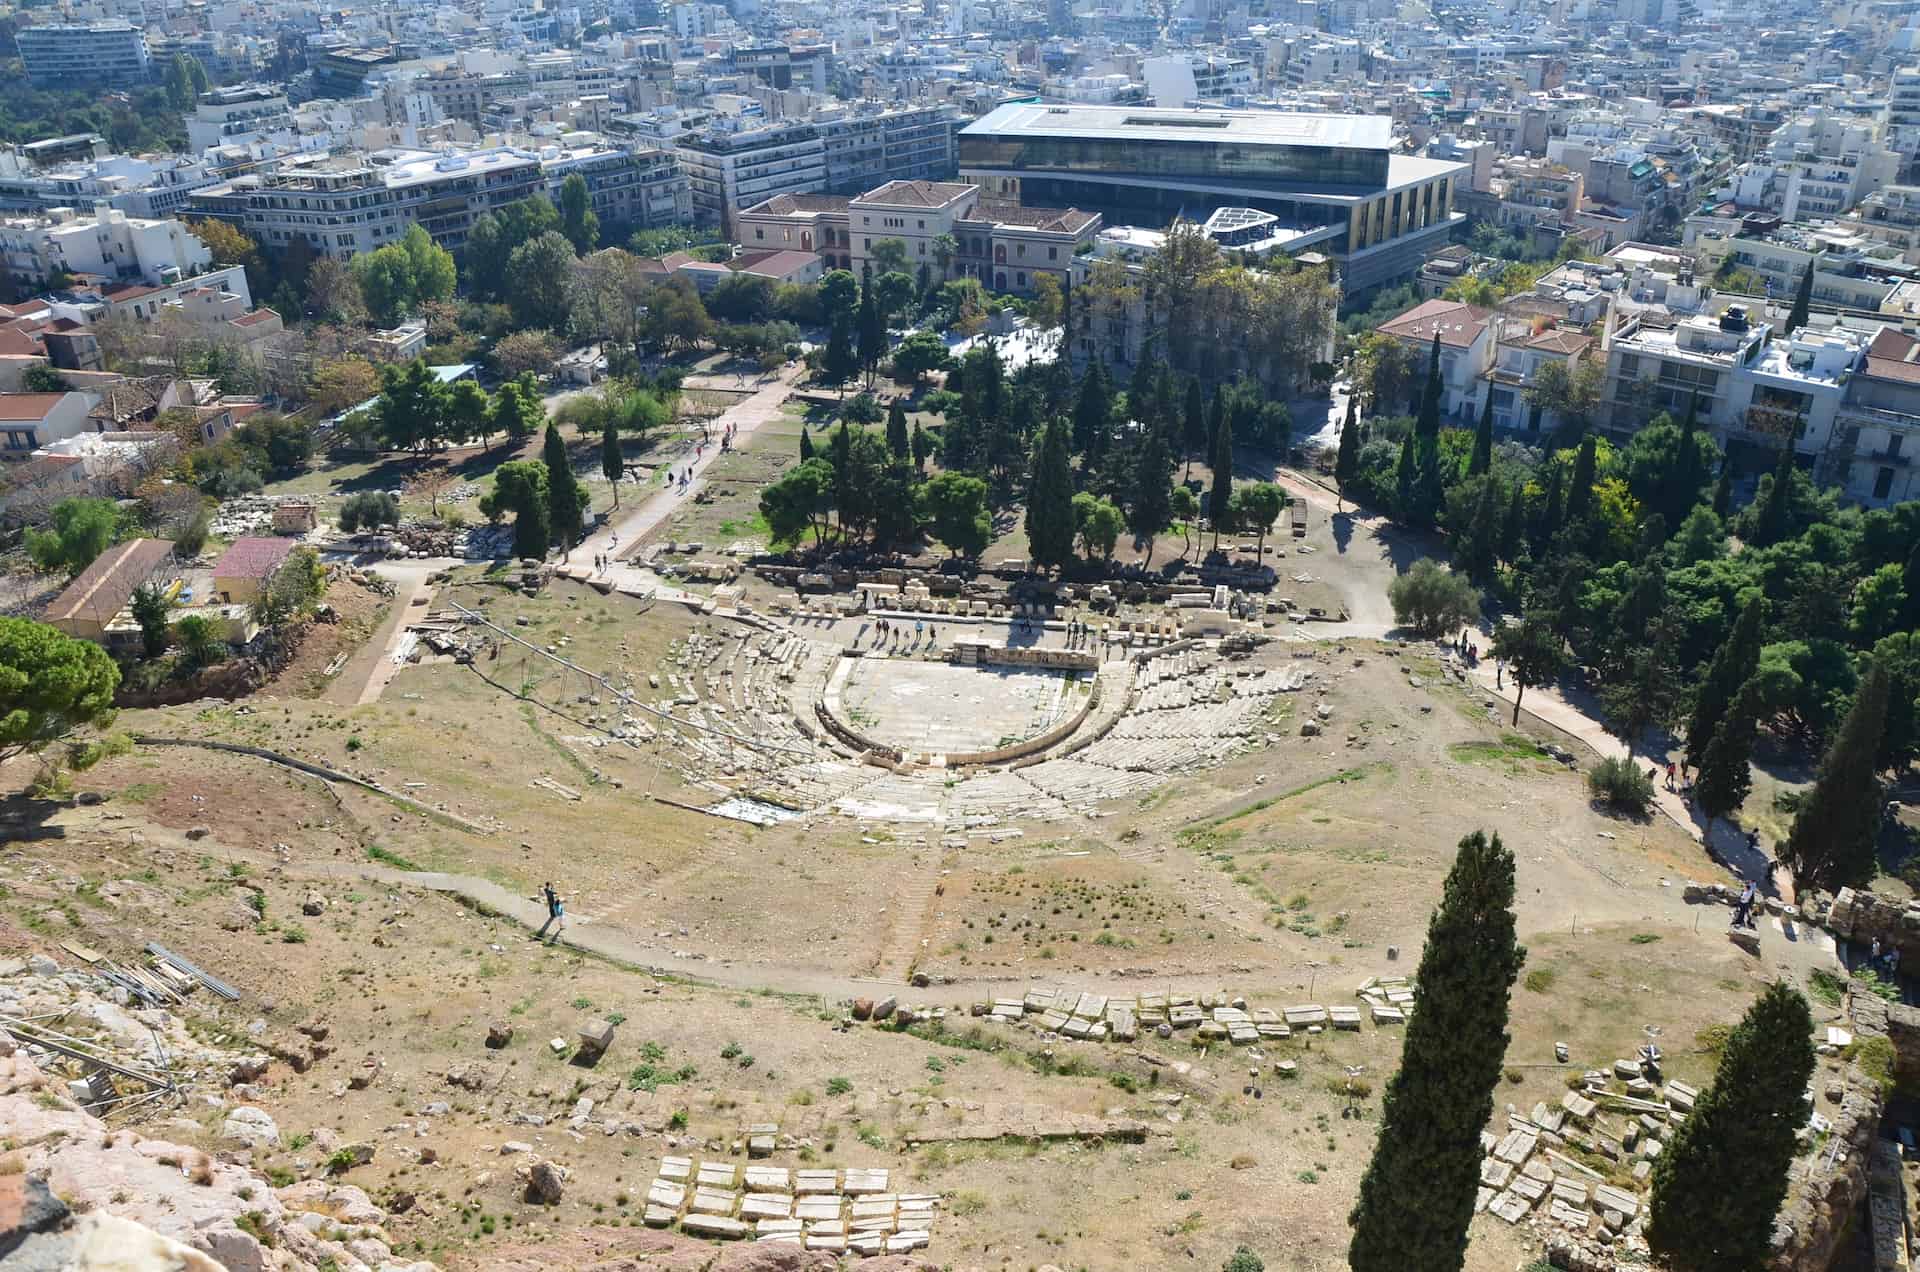 Theatre of Dionysus on the south slope of the Acropolis in Athens, Greece